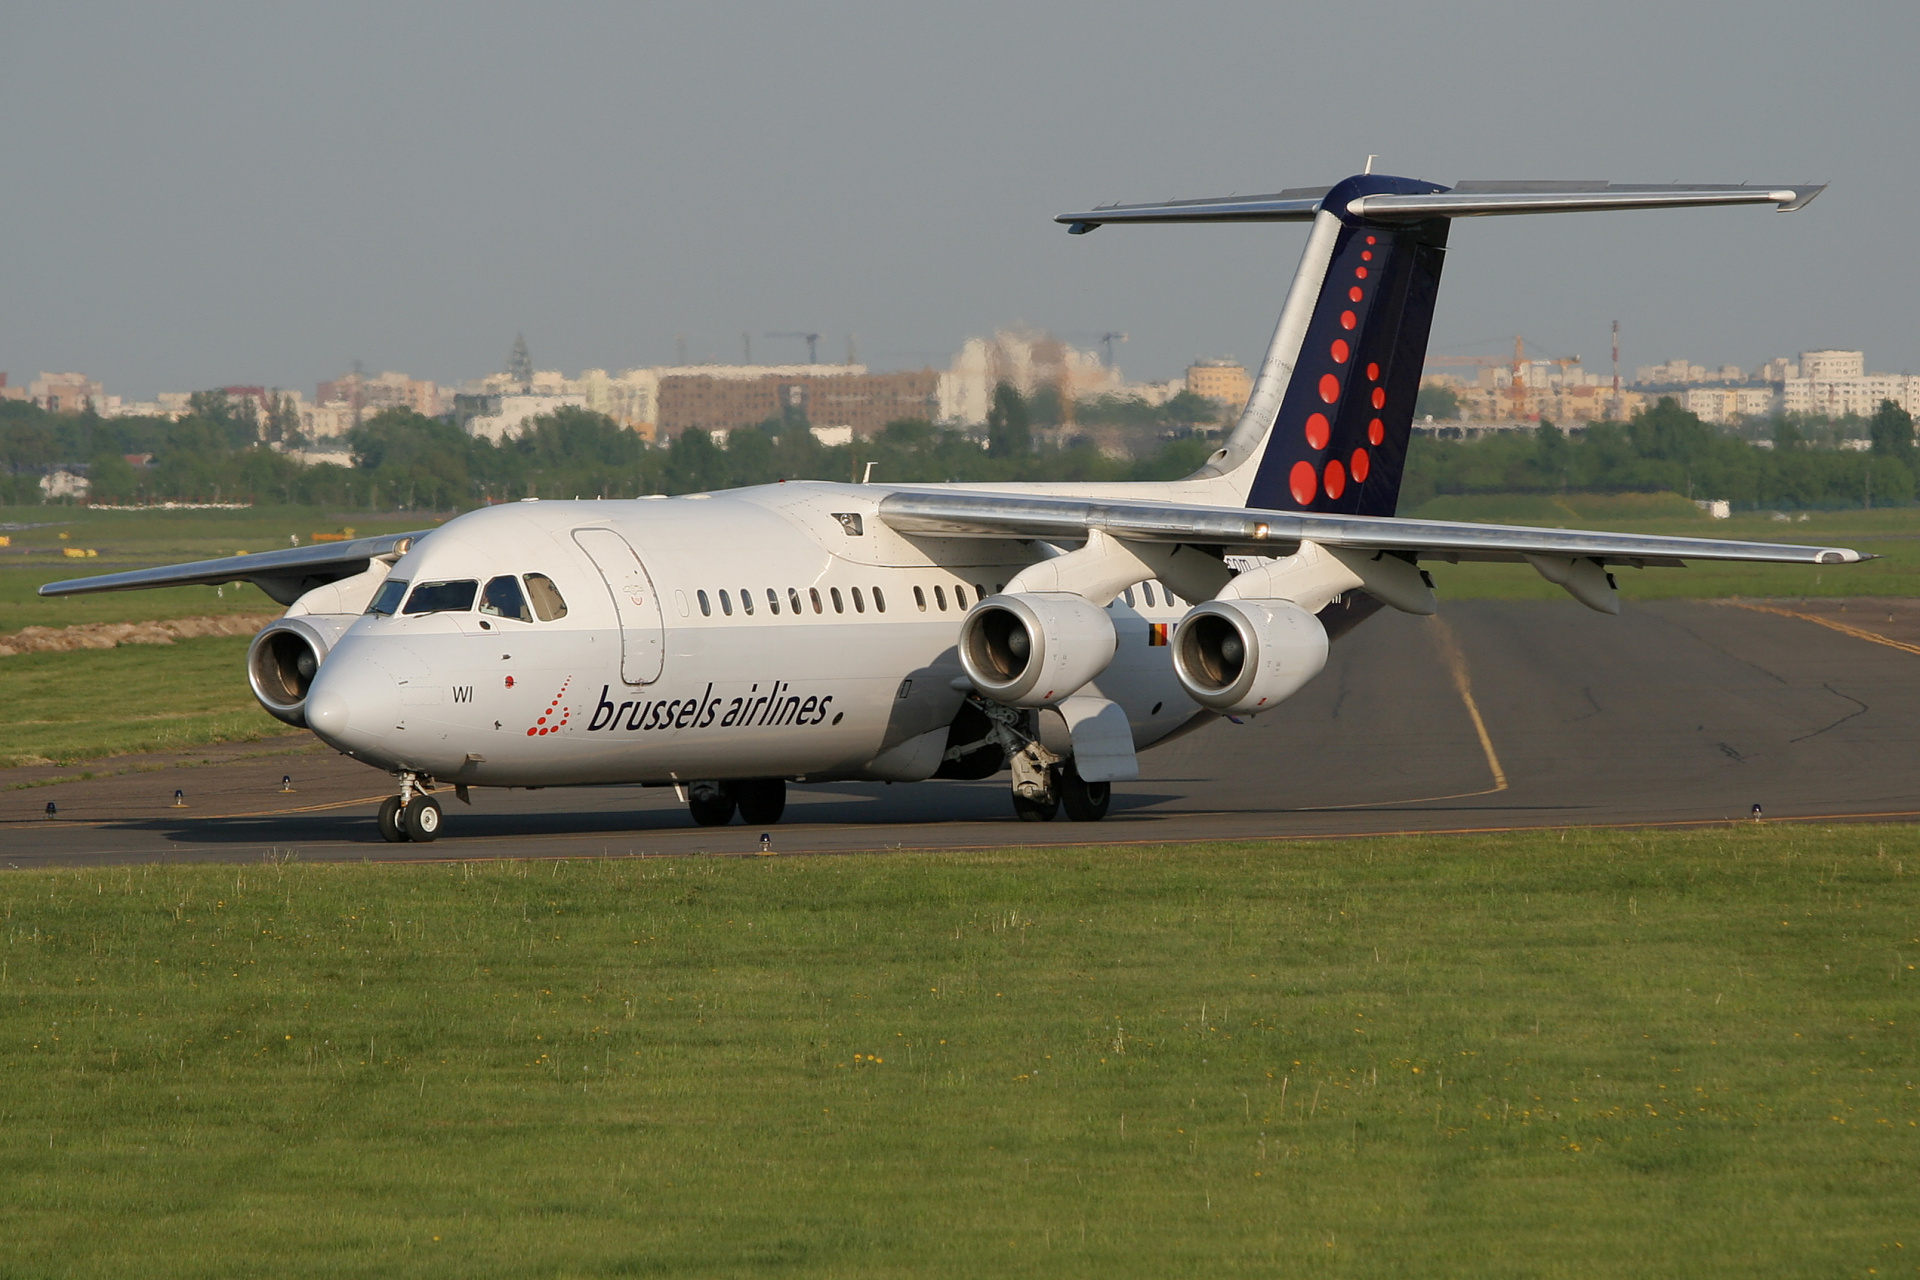 OO-DWI (Aircraft » EPWA Spotting » BAe 146 and revisions » Avro RJ100 » Brussels Airlines)